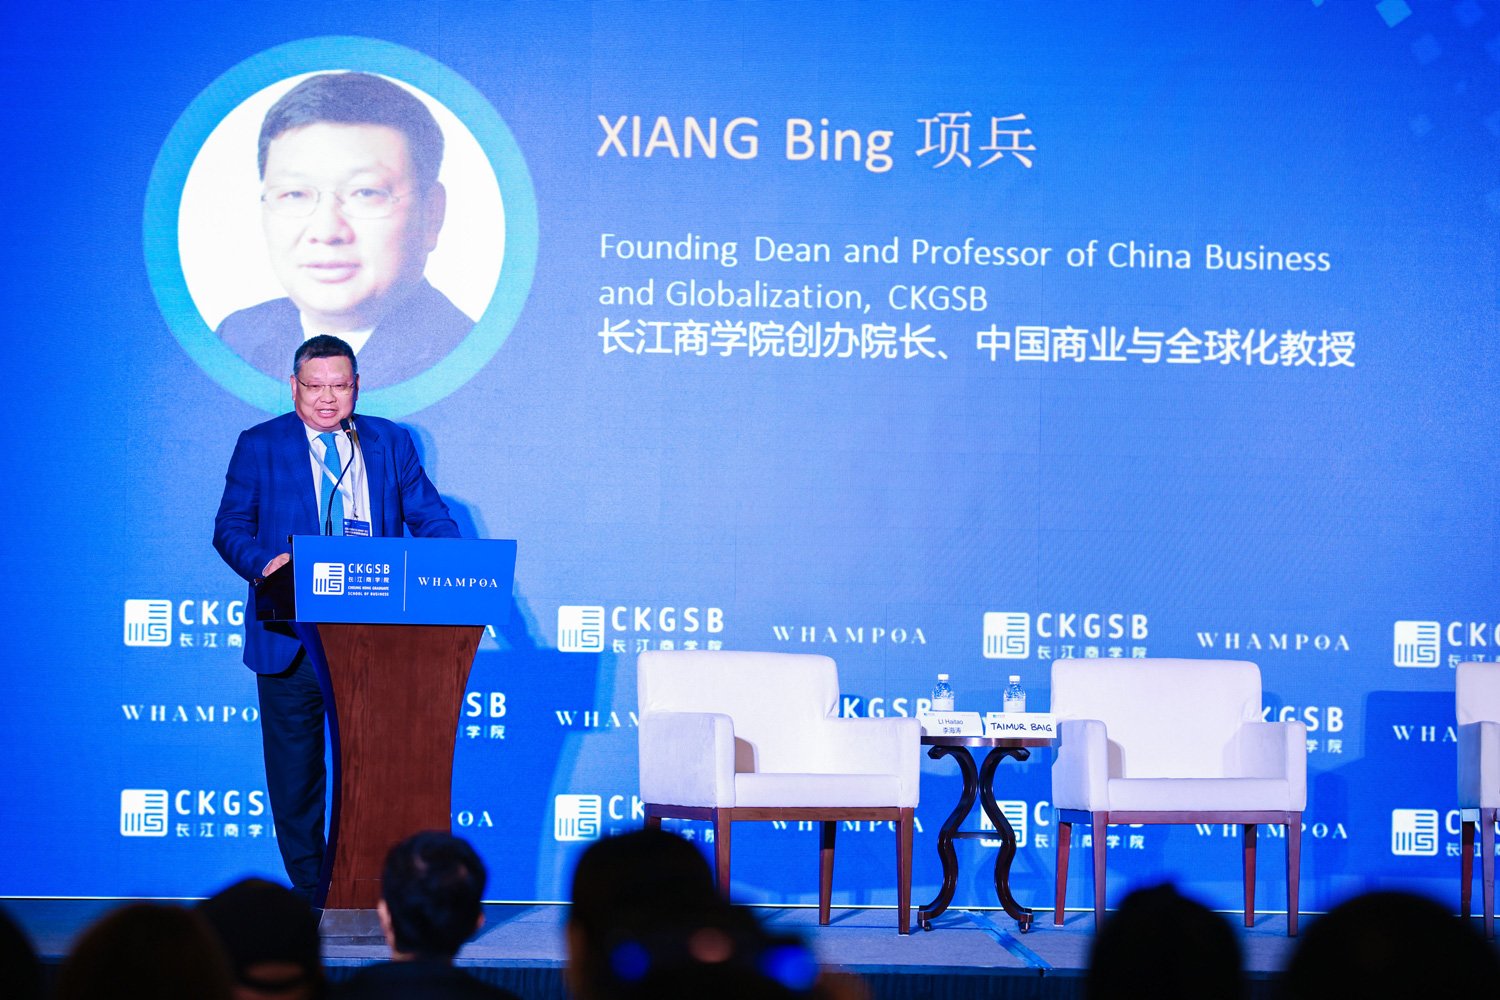 Xiang Bing, CKGSB Founding Dean and and Professor of China Business and Globalization, gives keynote speech at the summit